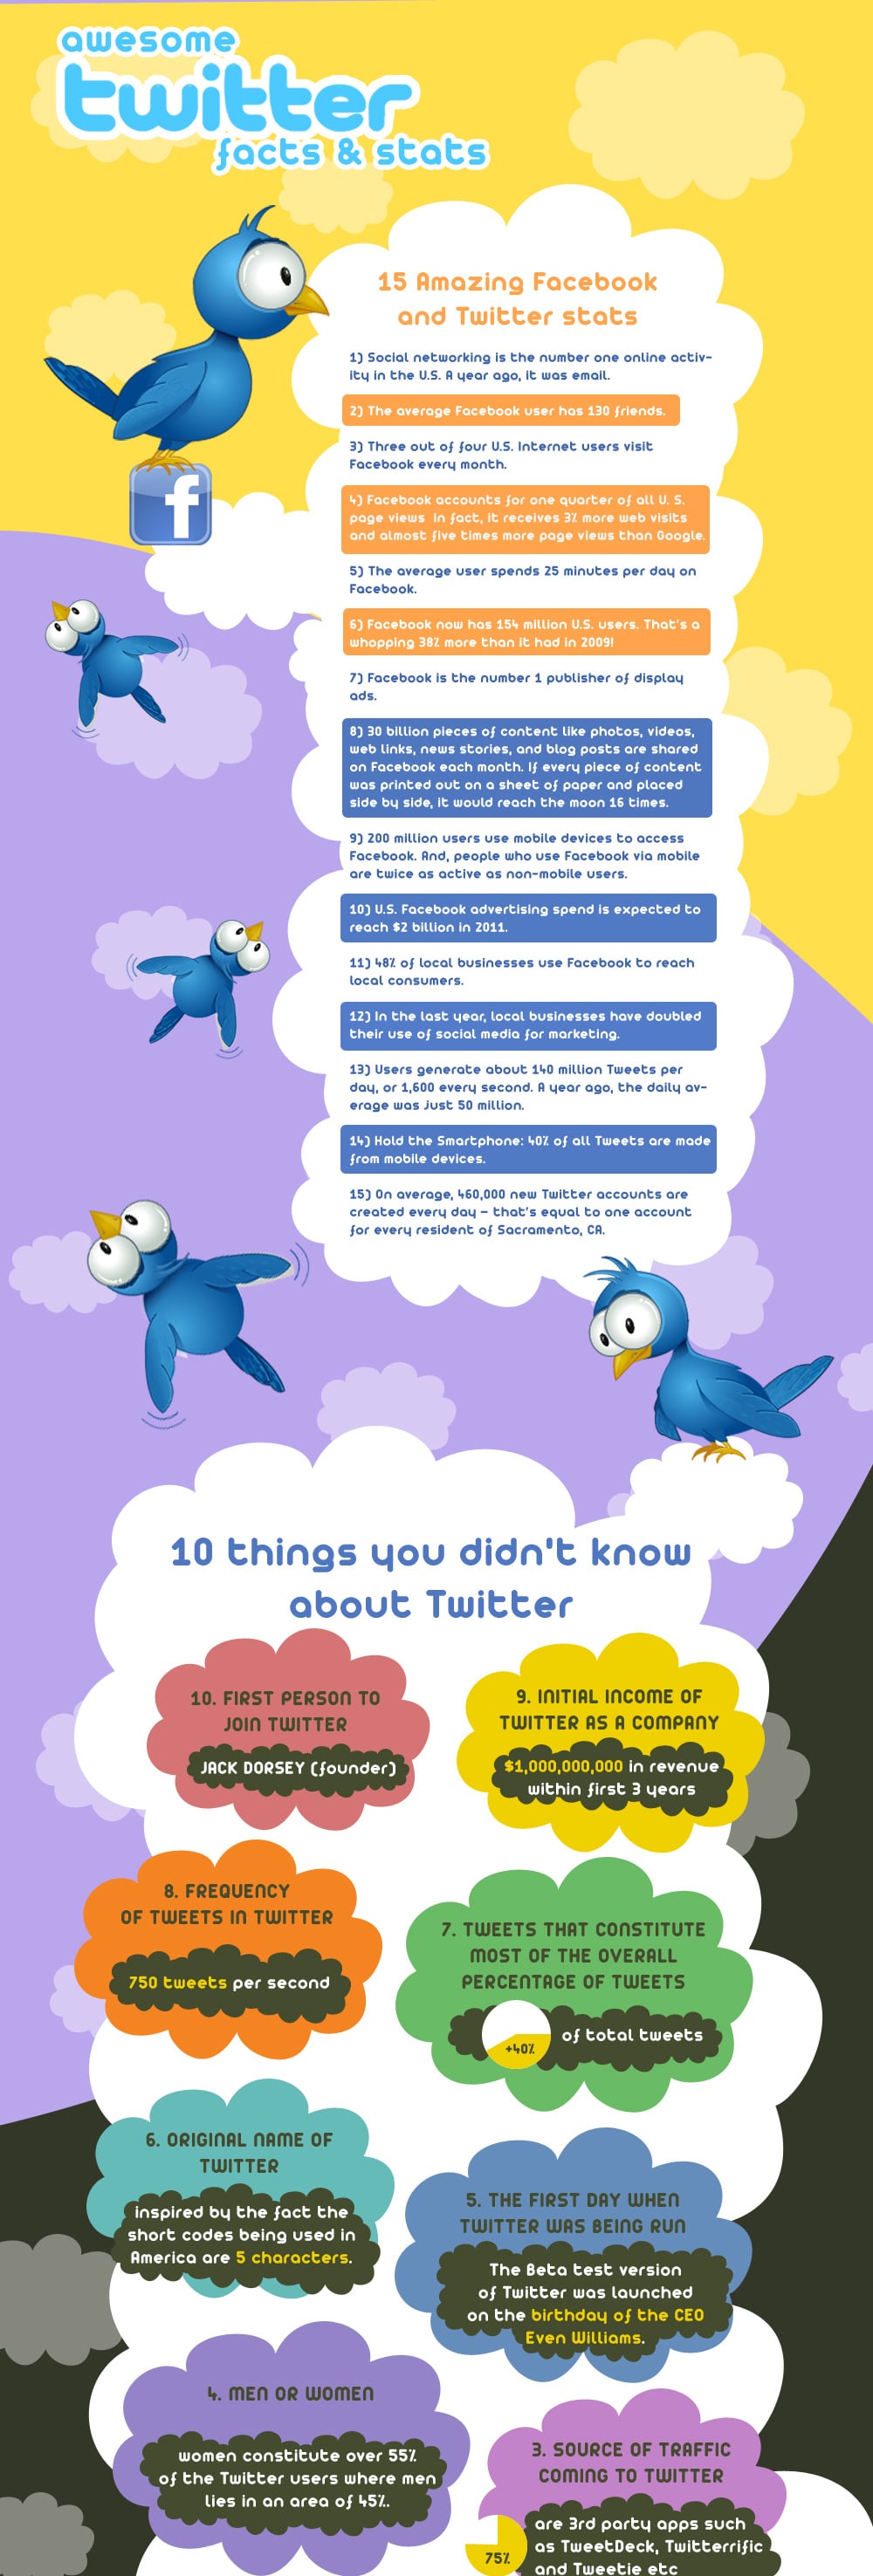 42 Fresh Facts About Twitter & Facebook [Infographic]